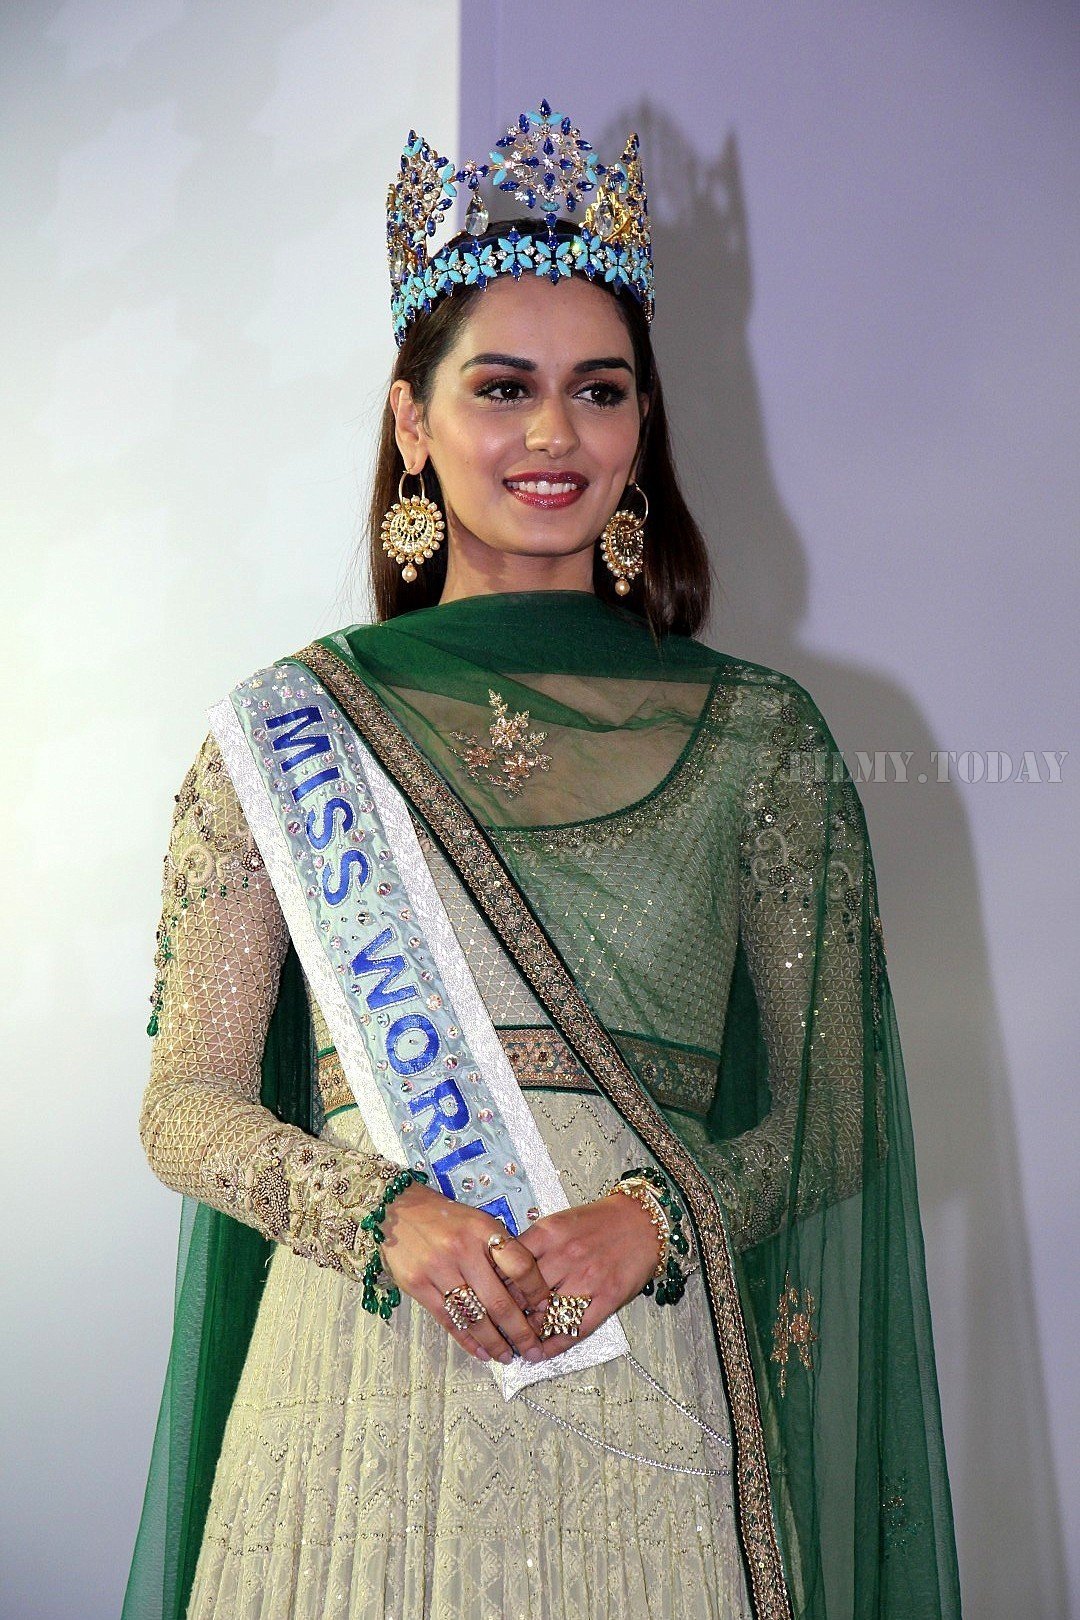 Photos: Manushi Chillar At The Press Conference For Winning Miss World Title | Picture 1547409